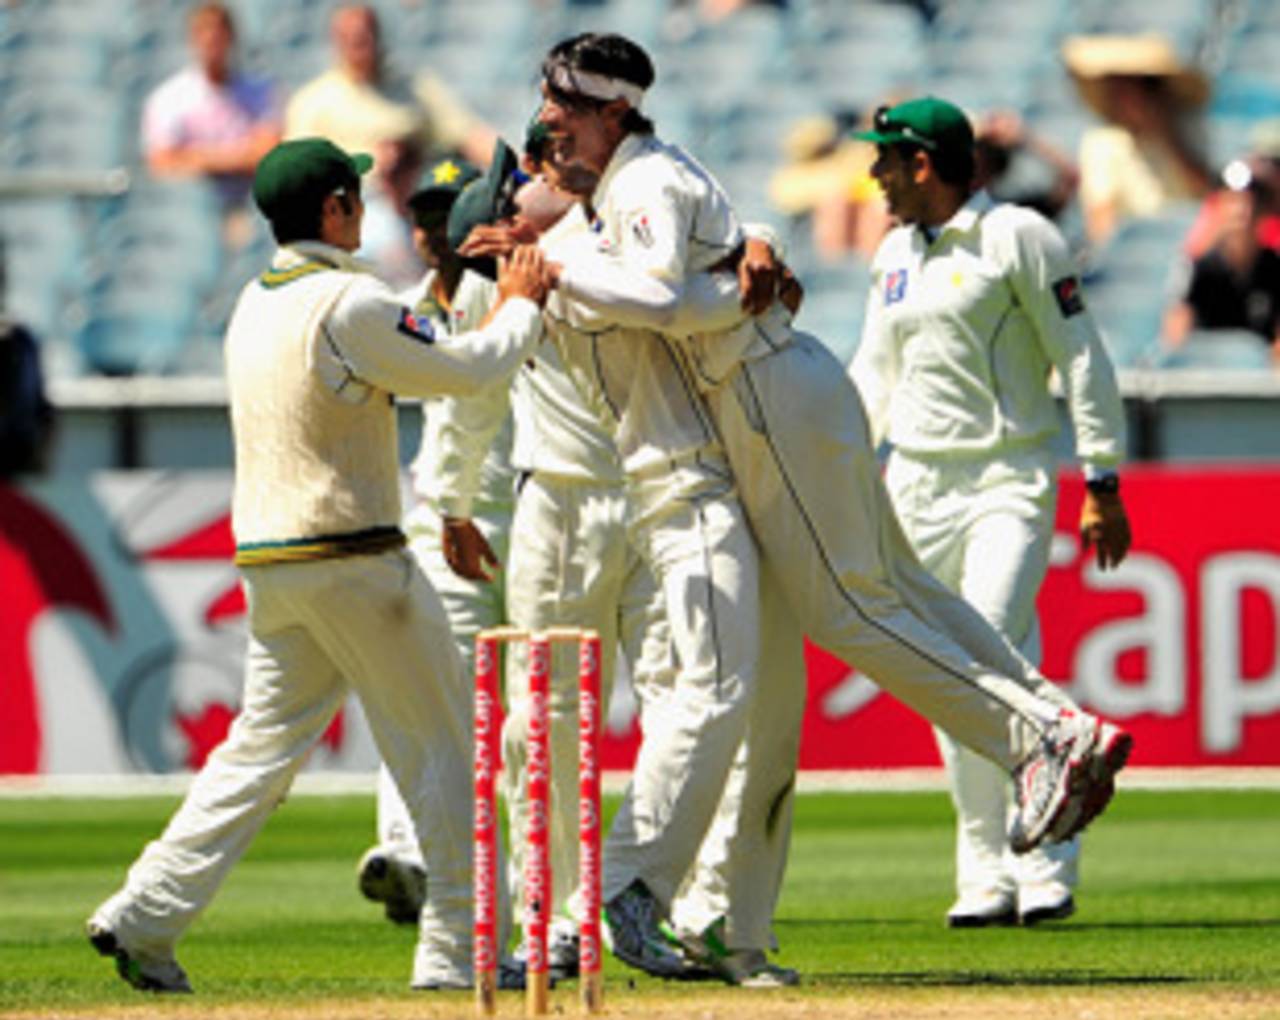 Mohammad Aamer lifted Pakistan with his maiden five-wicket bag, Australia v Pakistan, 1st Test, Melbourne, 4th day, December 29, 2009